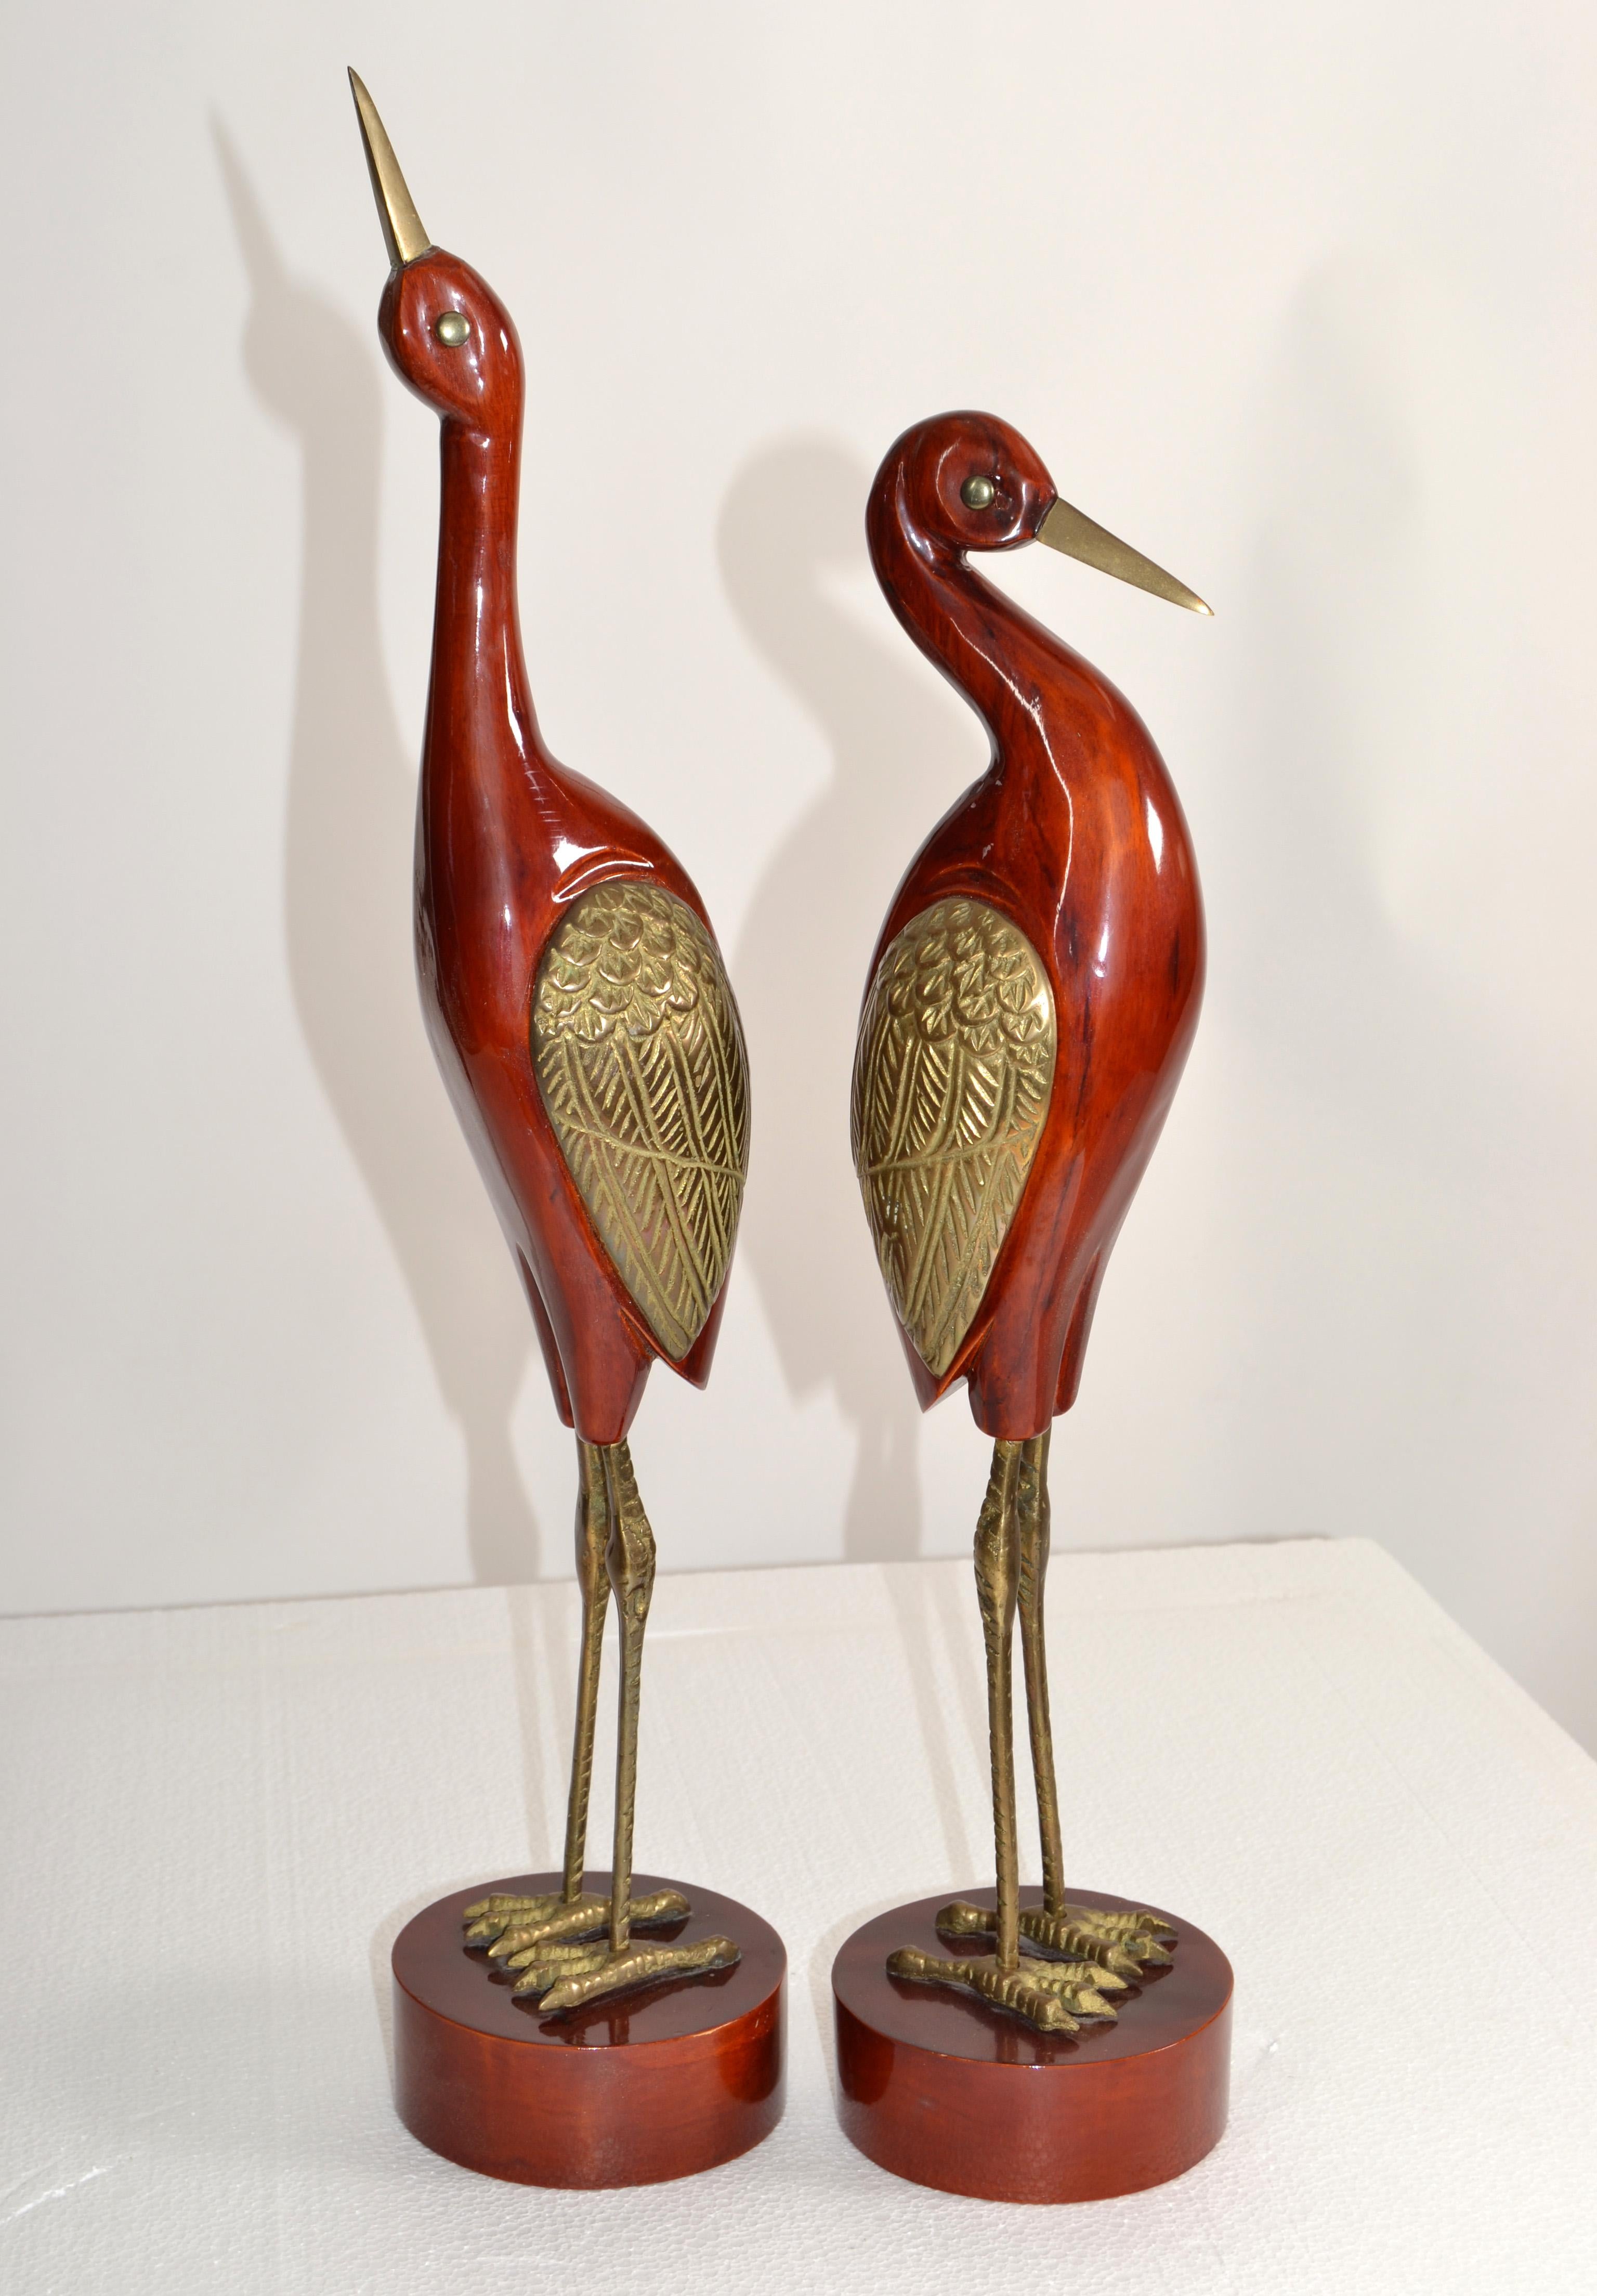 A Pair of vintage Brass Asian inspired Crane Sculptures on round hardwood bases.
Marked underneath Made in Korea.
Cranes have been used throughout design for ages because of their unique form and are considered lucky in Asia.
Smaller Crane is 18